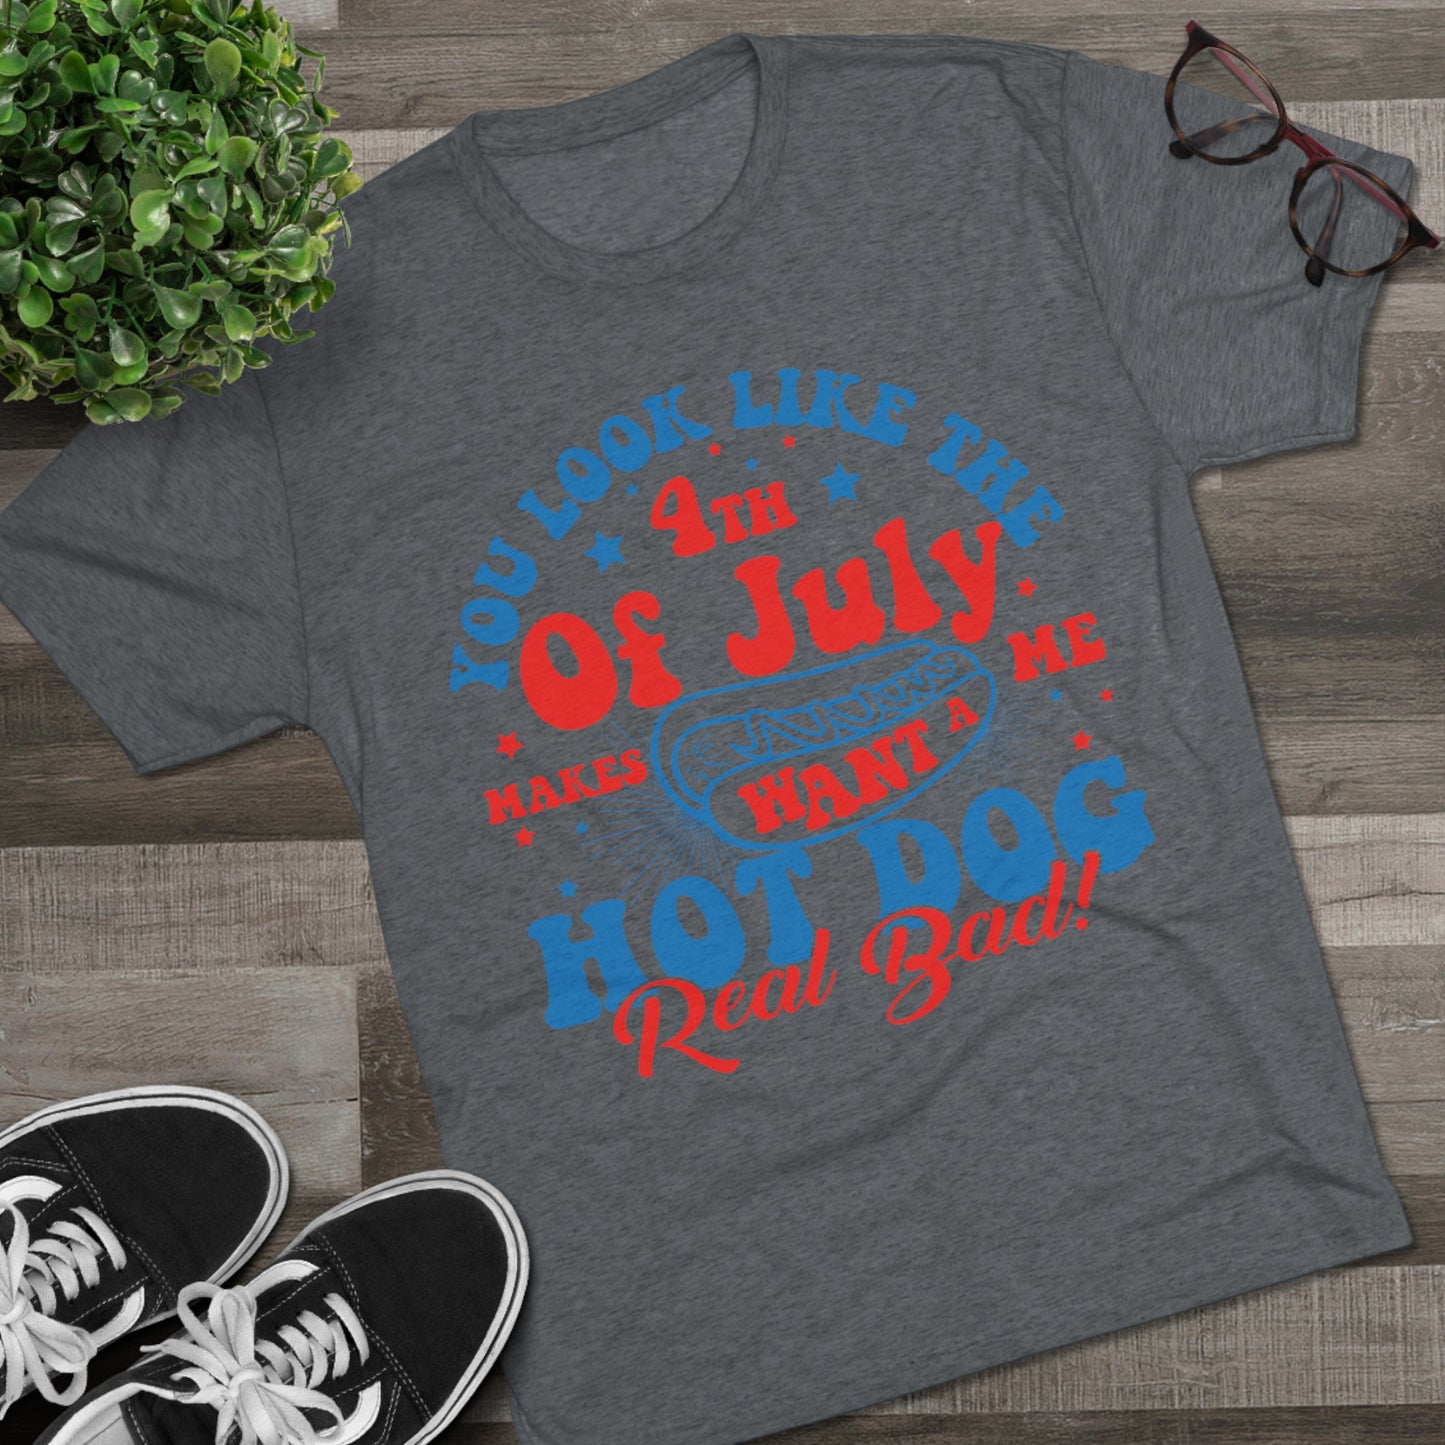 Get trendy with You Look Like the Fourth of July!  Tri-Blend Crew Tee - T-Shirt available at Good Gift Company. Grab yours for $21.88 today!